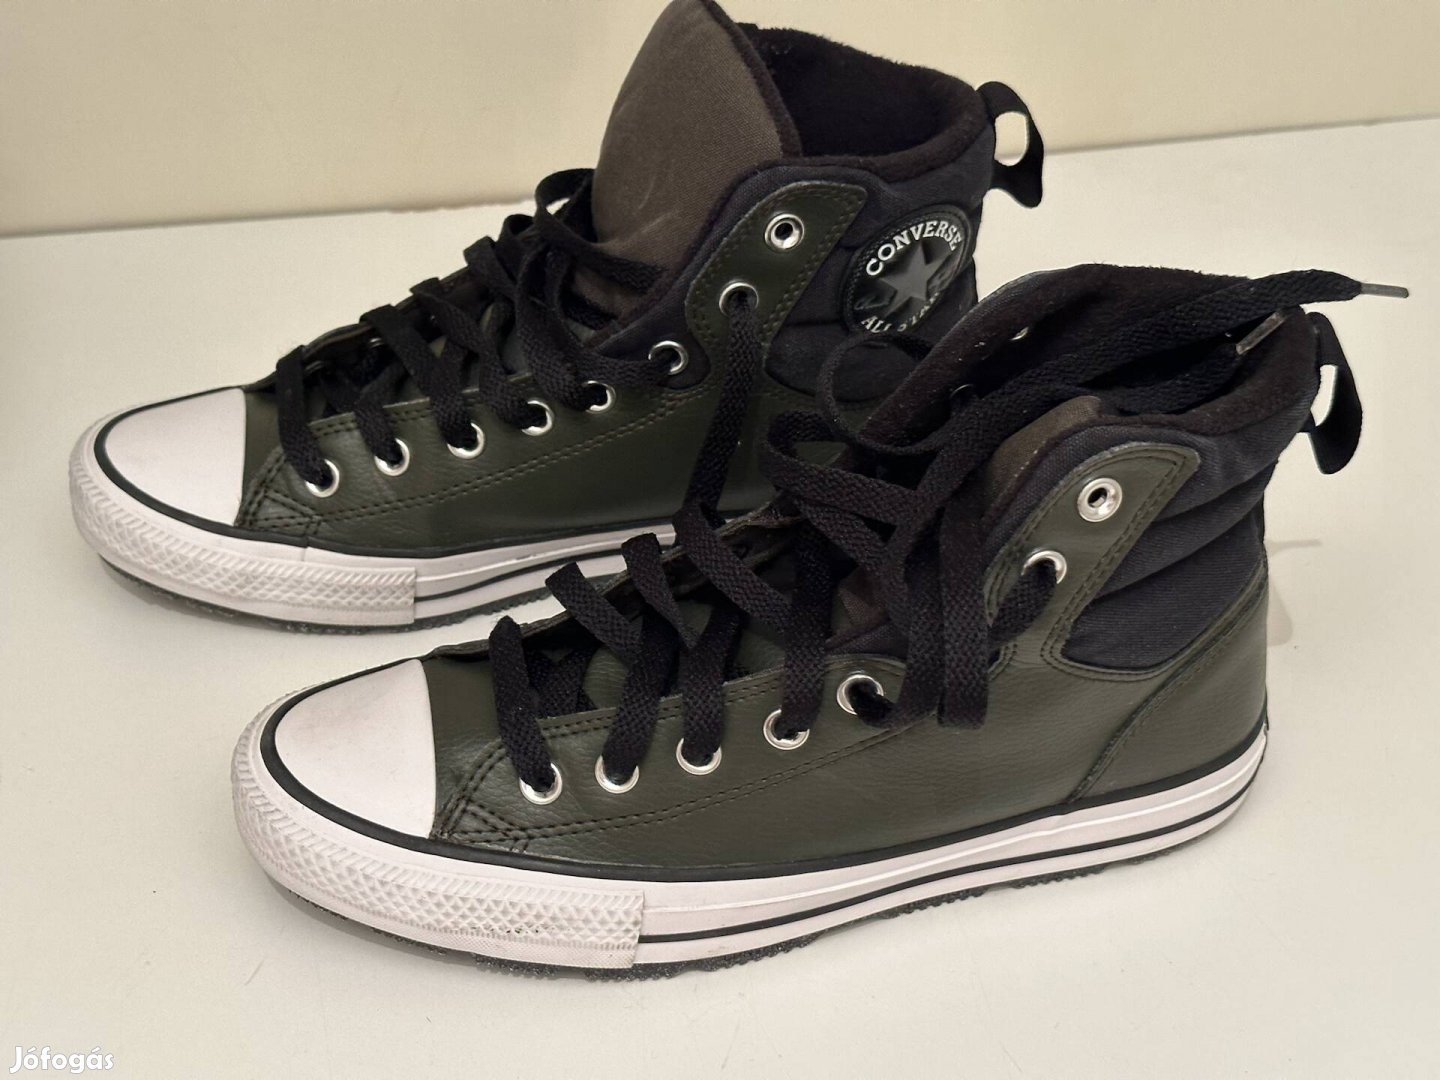 Converse " Chuck Taylor all Star water resistant " Sneaker 41